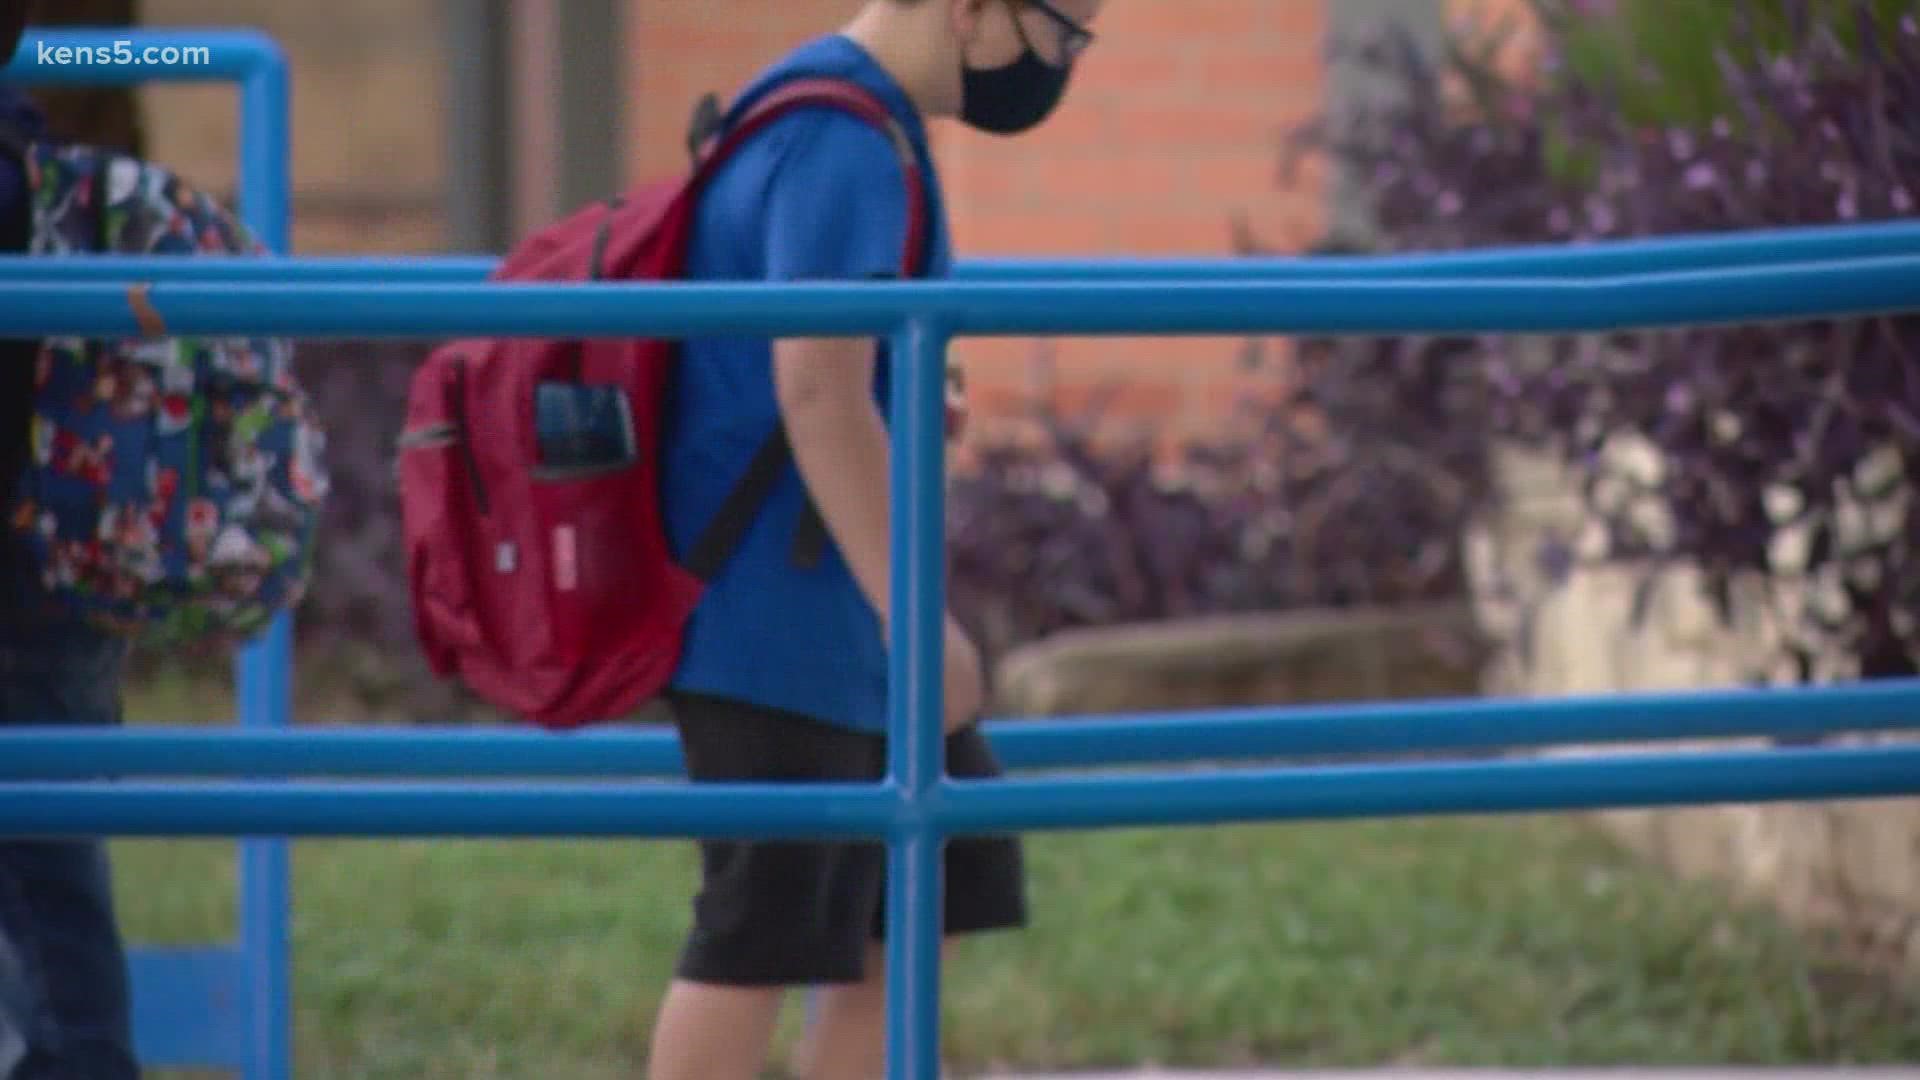 San Antonio ISD will discuss the results of a community mask mandate survey Monday night, which could lead to a lifting of the requirement.